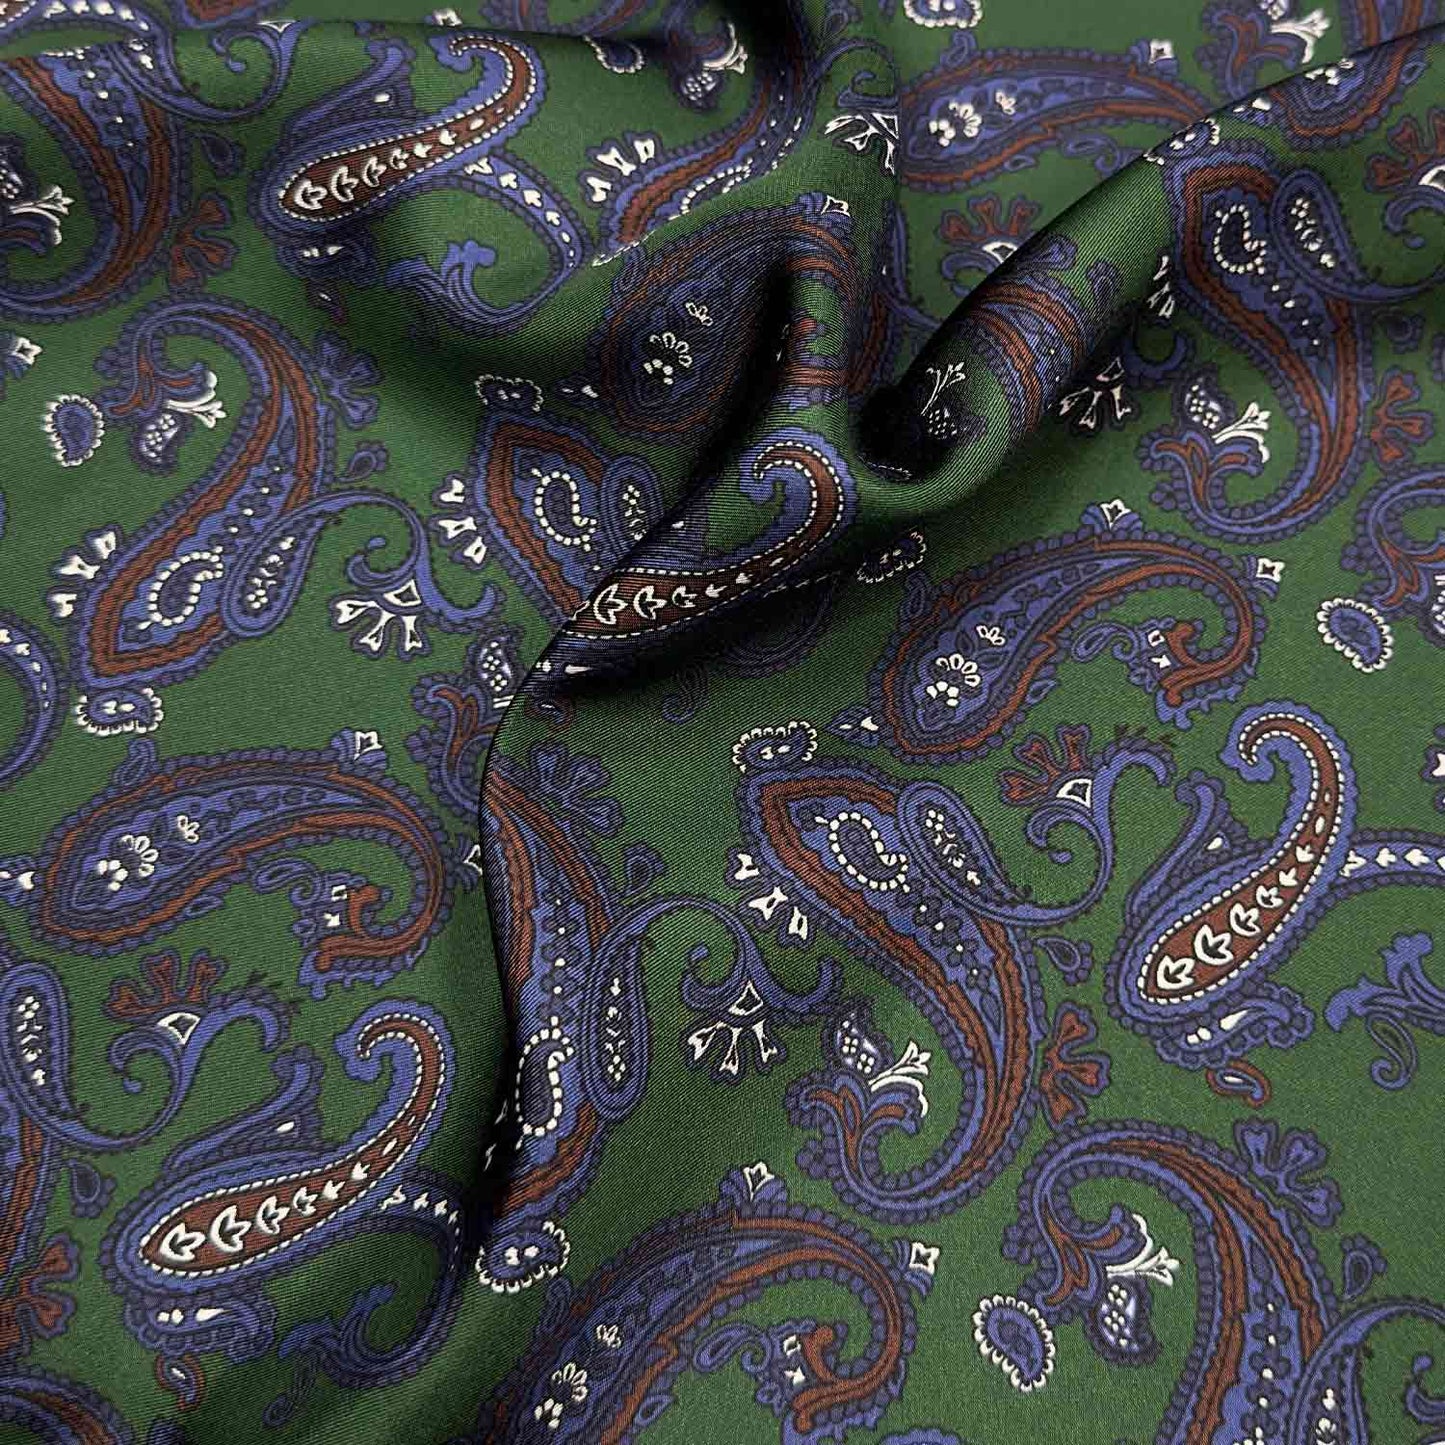 Grass Green Silk Pocket Square Paisley Pattern. Men's paisley pocket square made with soft silk and with rolled edge, grass green background with coffee brown and denim blue paisley pattern